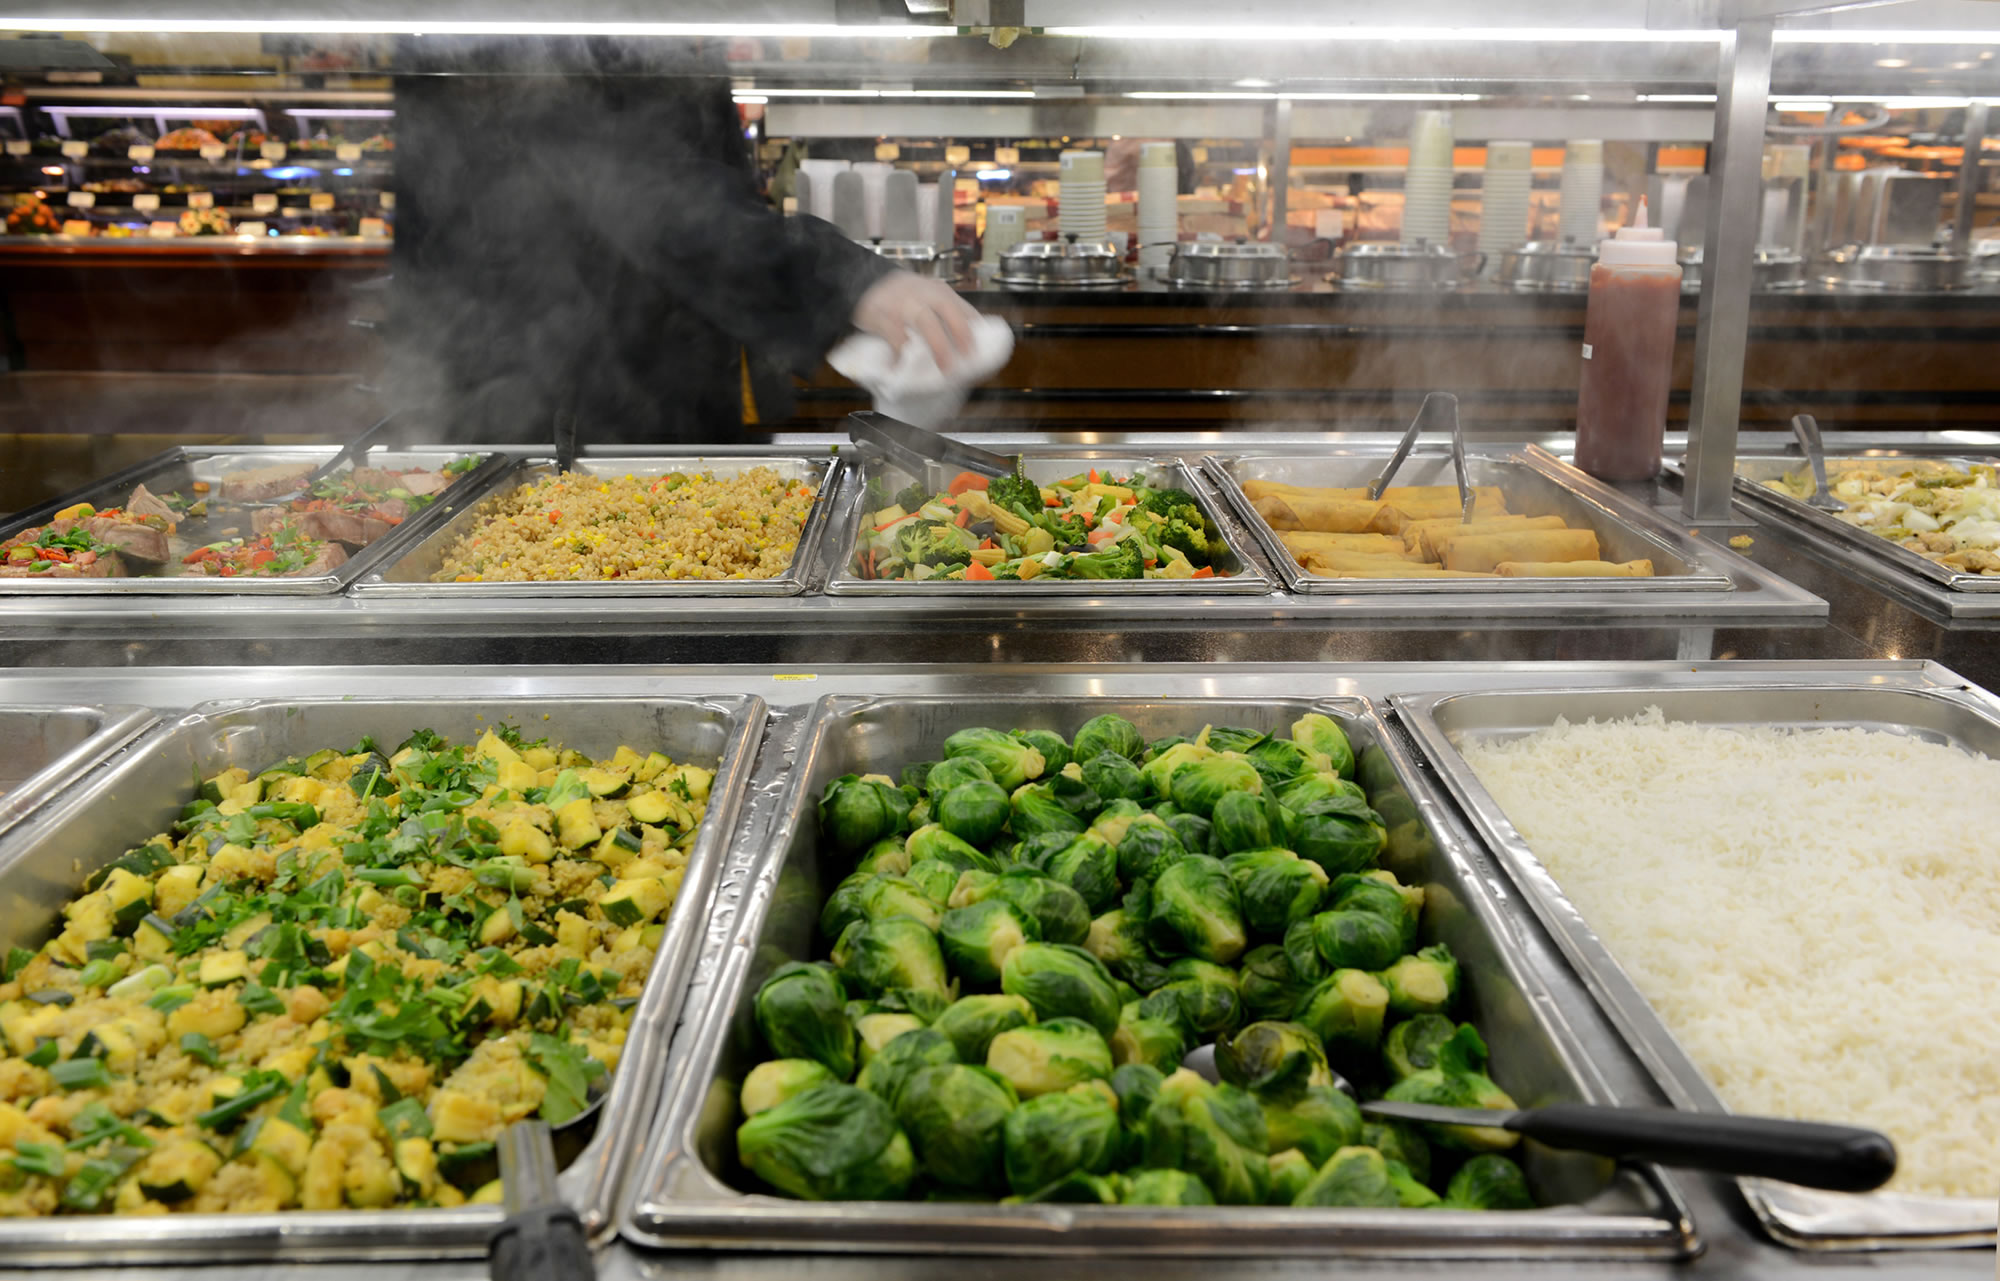 The hot bar's hopping at lunchtime at a Whole Foods Market in Washington.